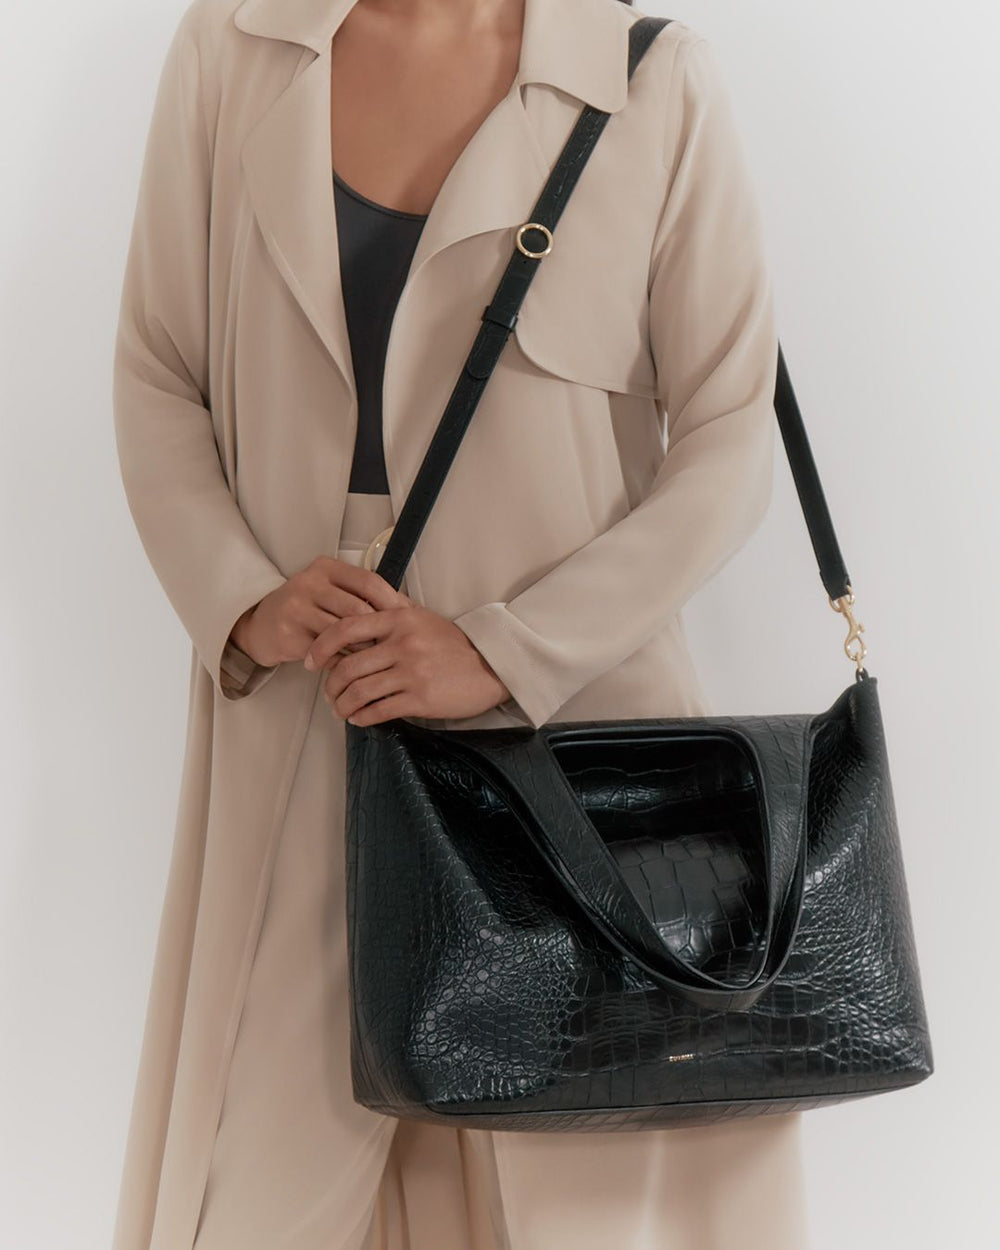 Person holding a handbag with a shoulder strap, wearing a coat